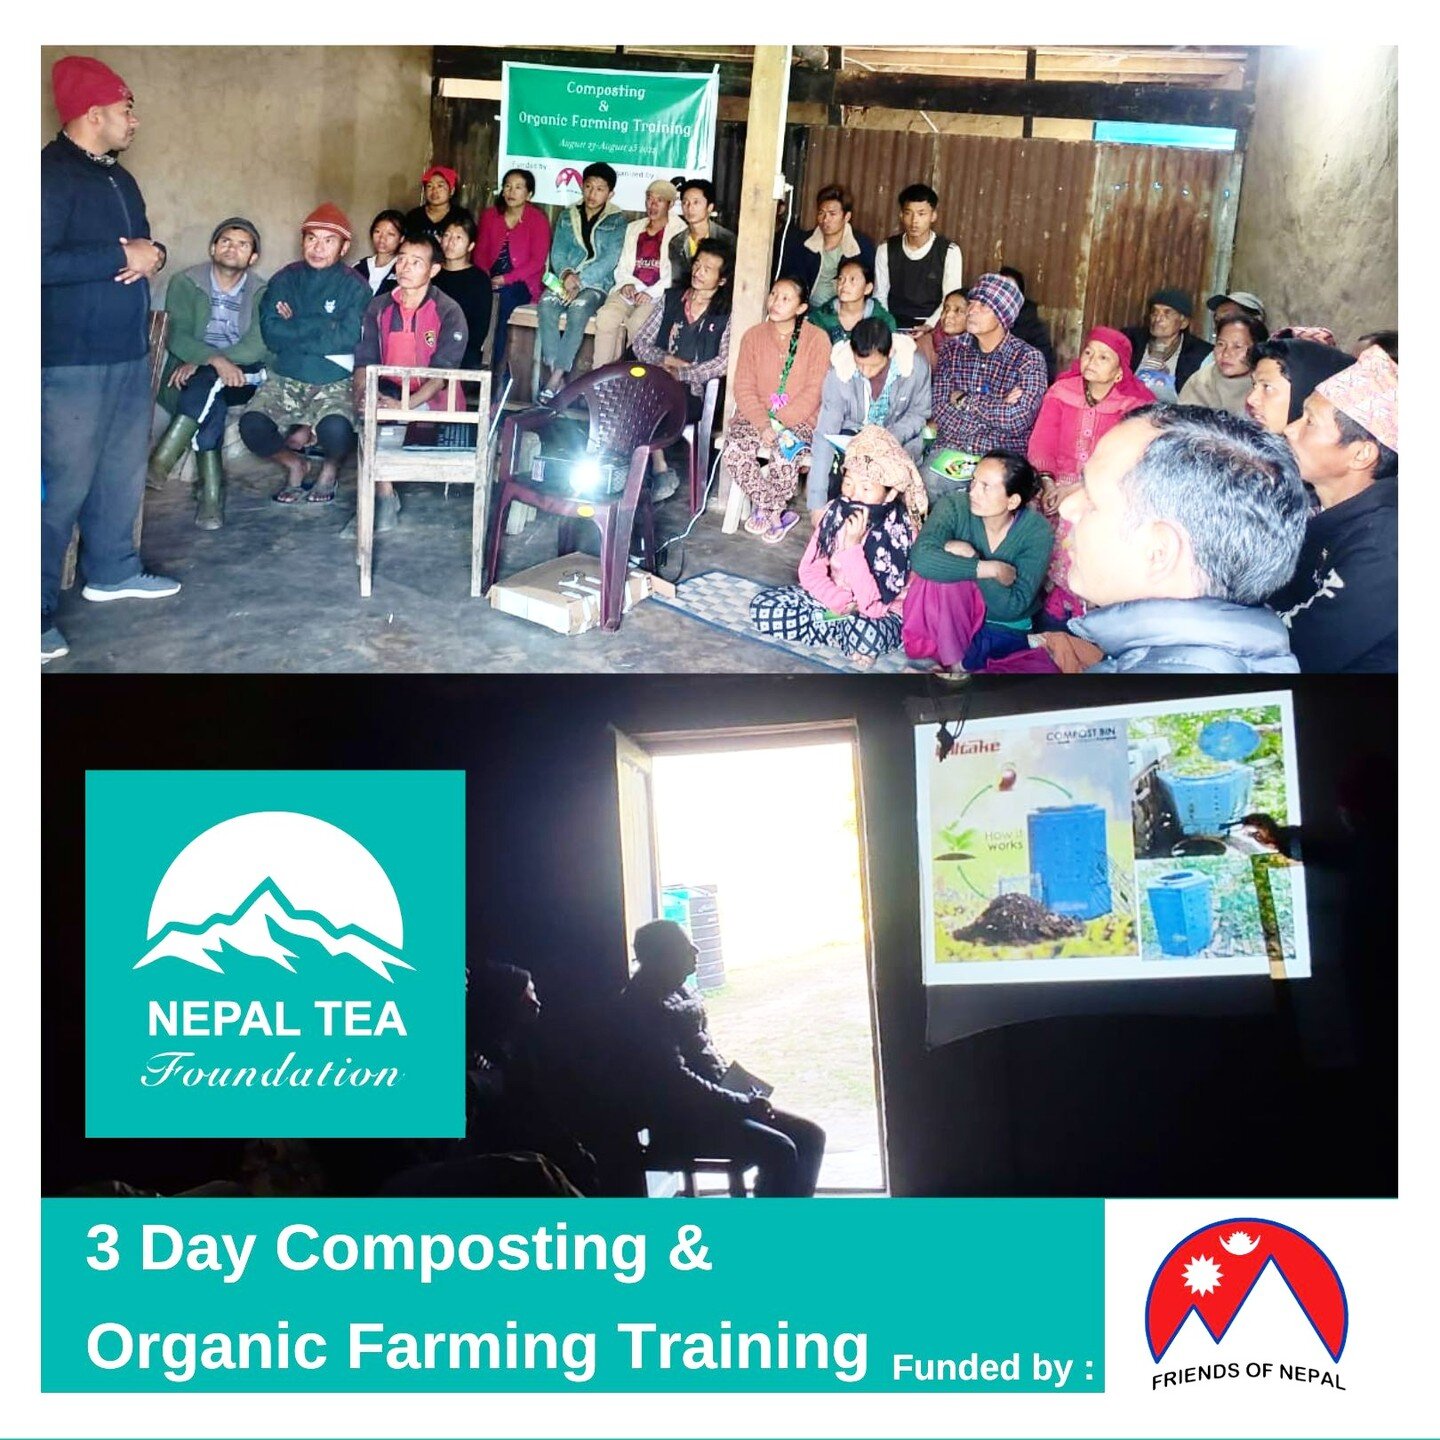 Our organic farming and composting training started today. Today we discussed about Organic waste, , Composting, Benefits of composting, Organic fertilizers.
 
Keshar sir explained about the market opportunities for organic manure to participants. He